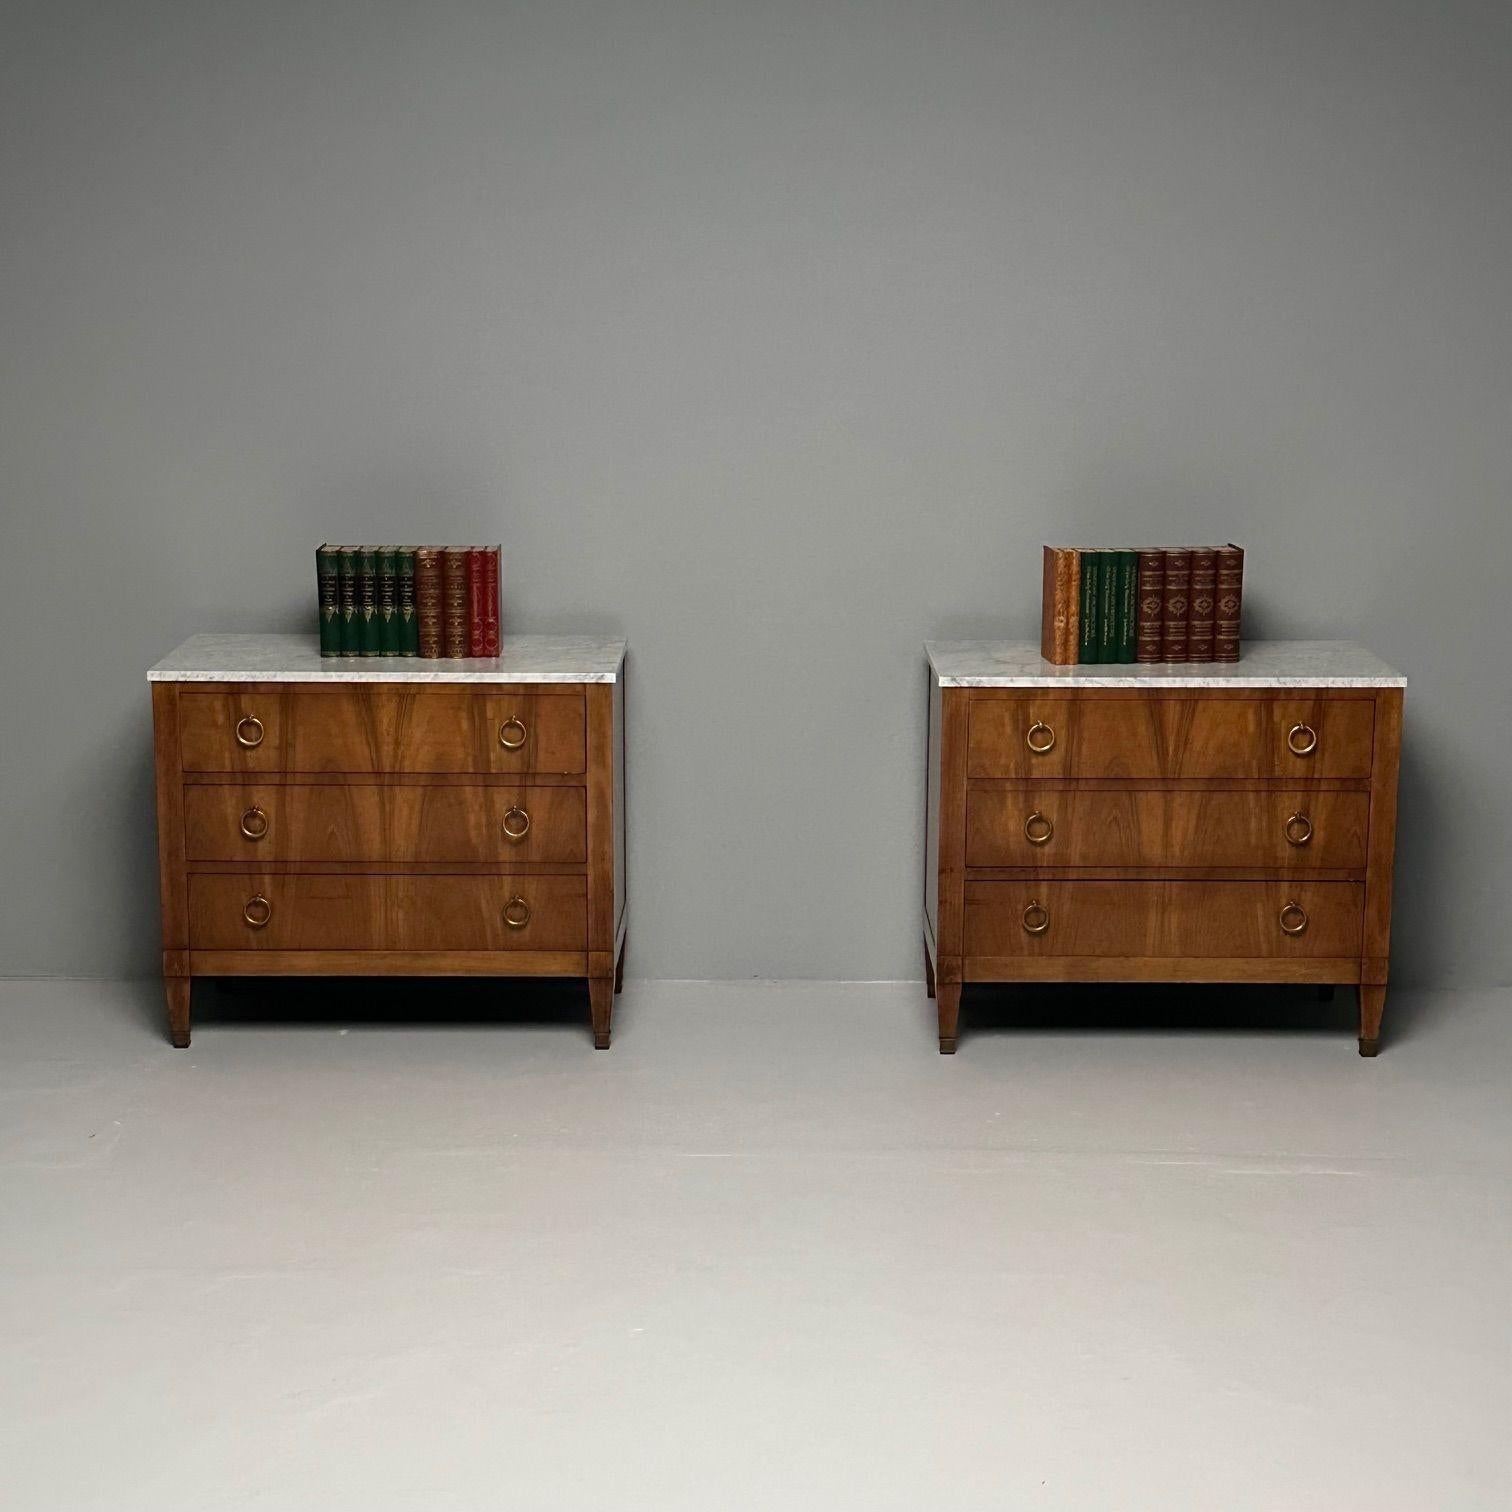 20th Century Baker Furniture Compnany, PE Guerin, Provincial, Pair of Cabinets, Marble, Brass